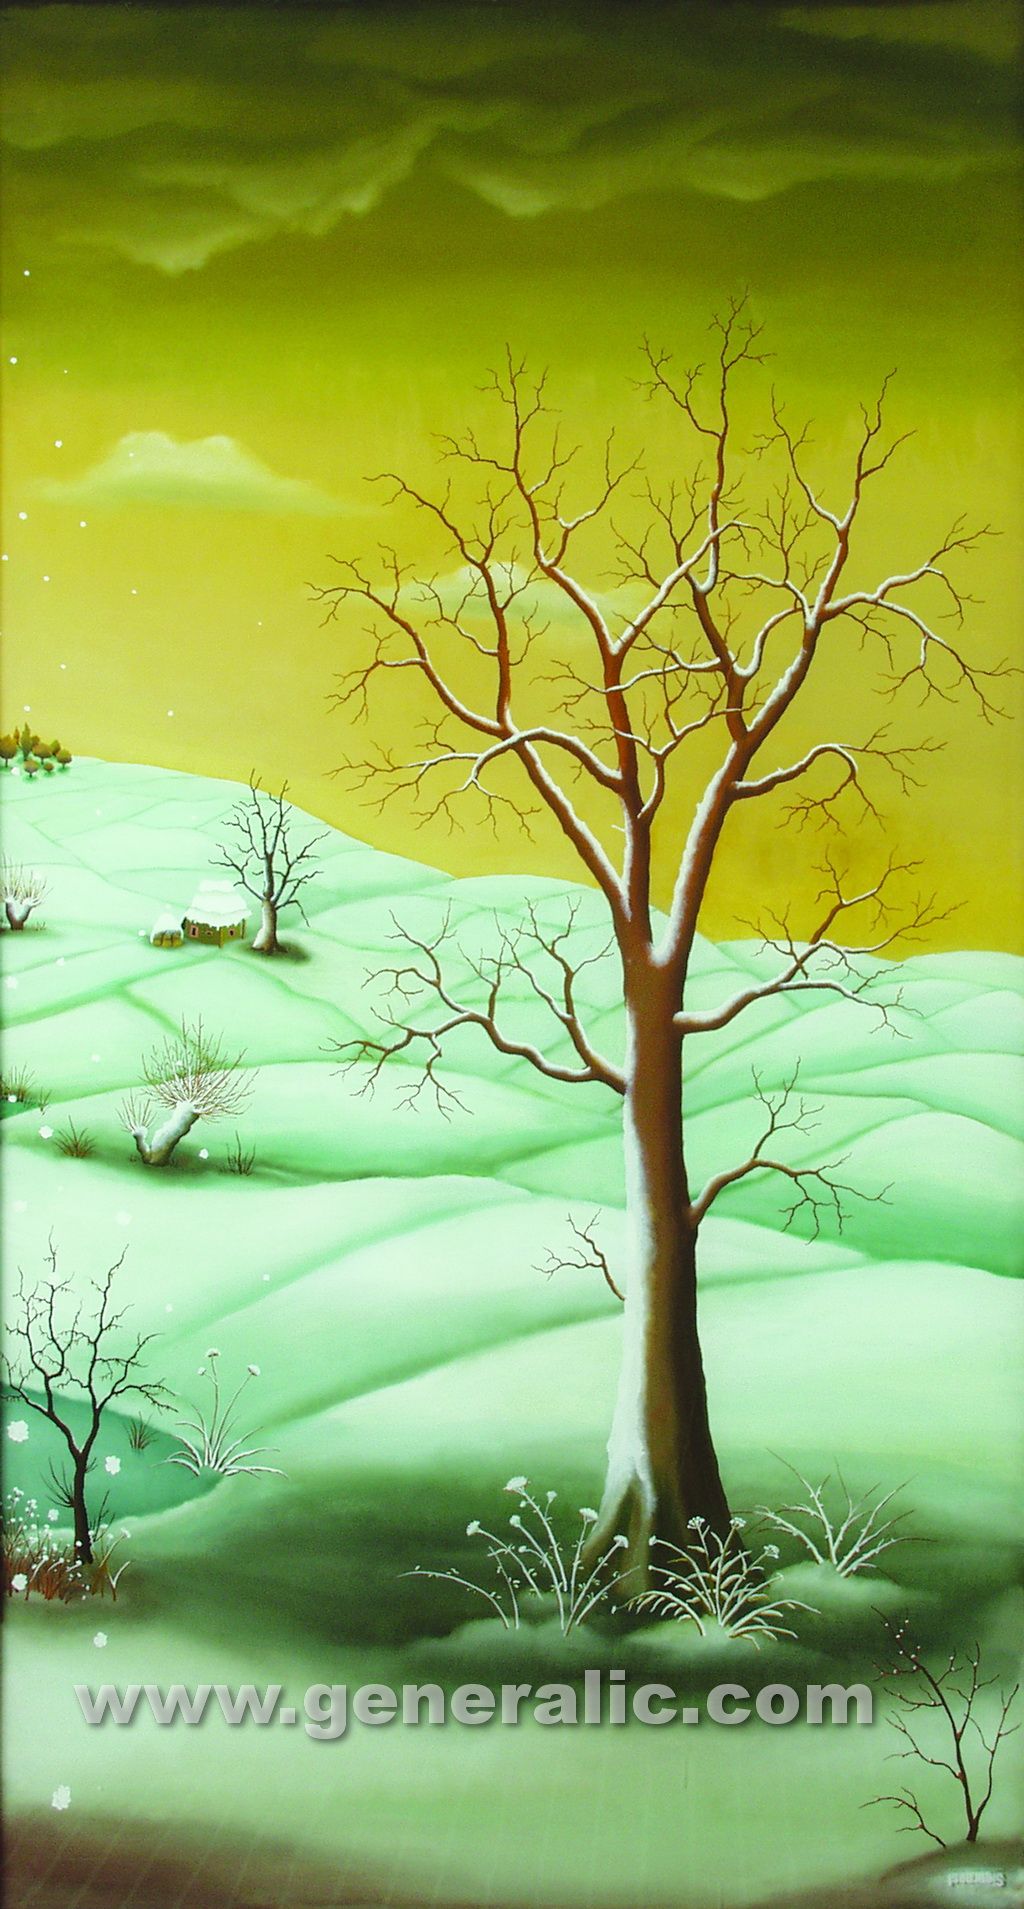 Ivan Generalic, 1973, The first snow - triptych 3, oil on glass